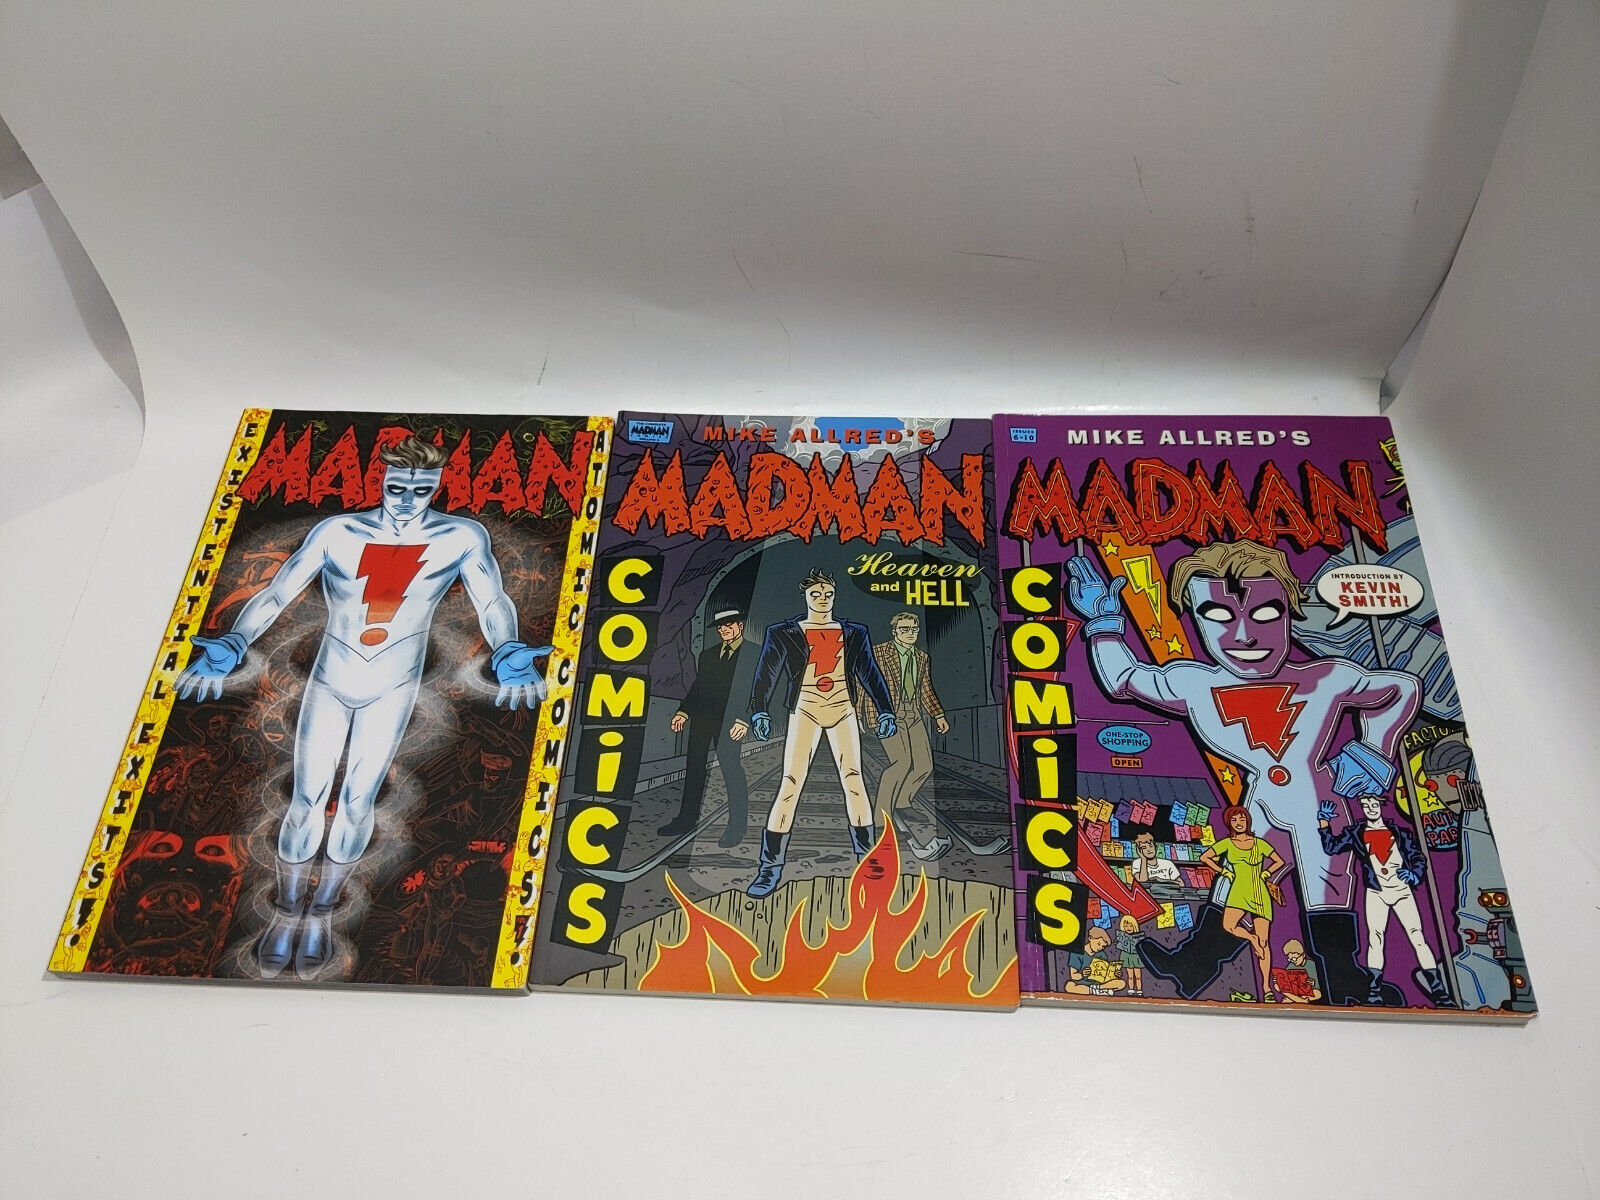 Madman Atomic Comics Volume 1 By Mike Alred 1st Print 1st Edition Graphic Novel